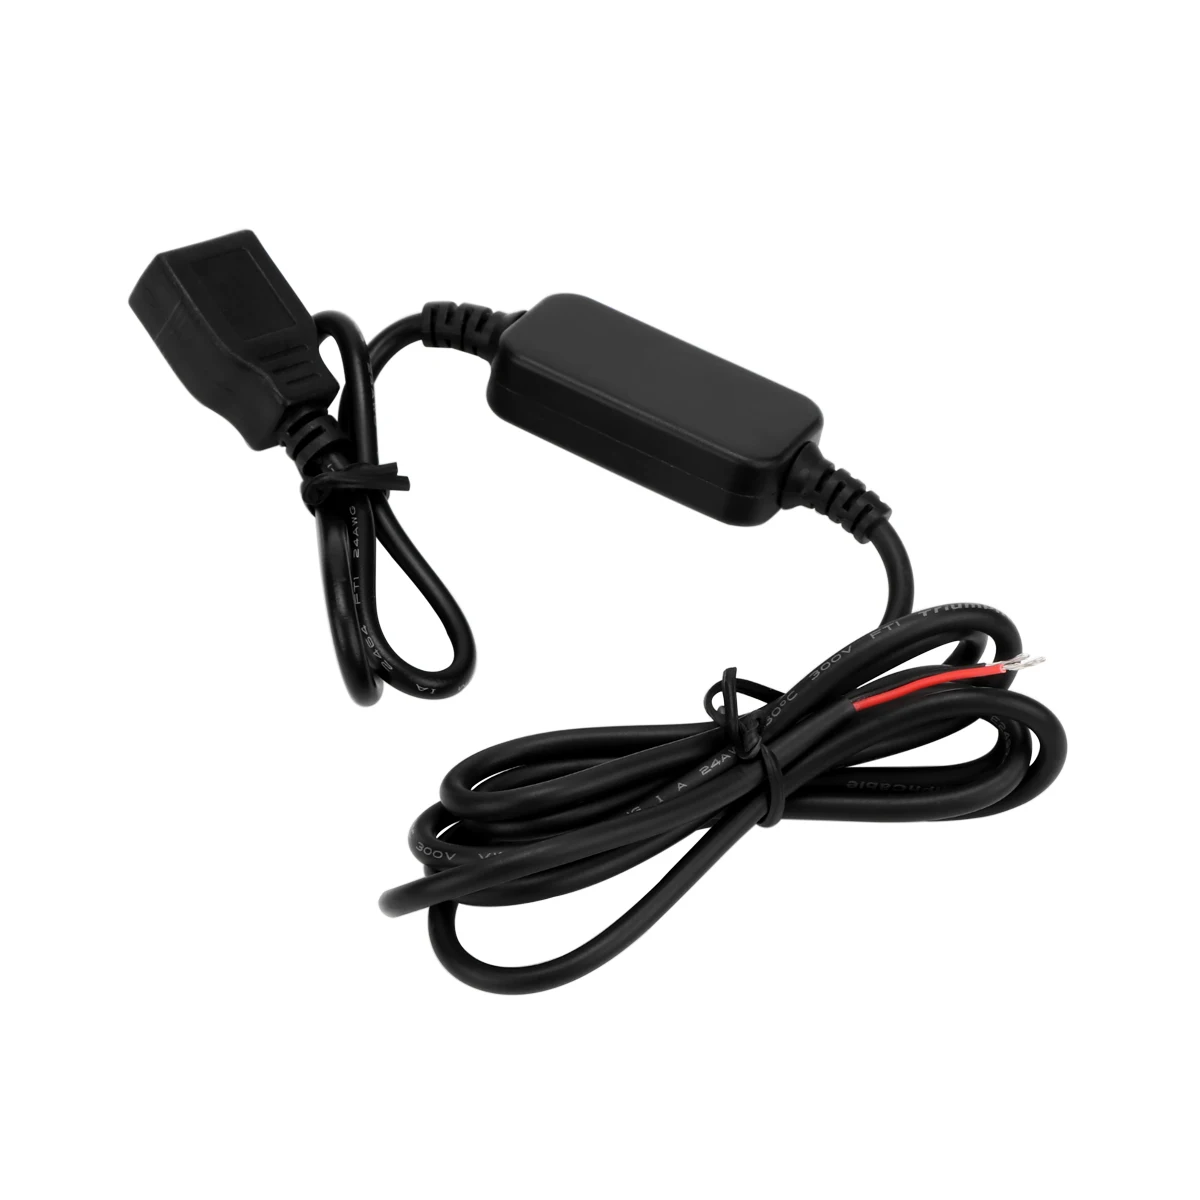 

15W Dual Voltage USB Adapter Converter Inverter Double USB Converter 3A 12 V To 5 V Step Down Module Car Accessories Black